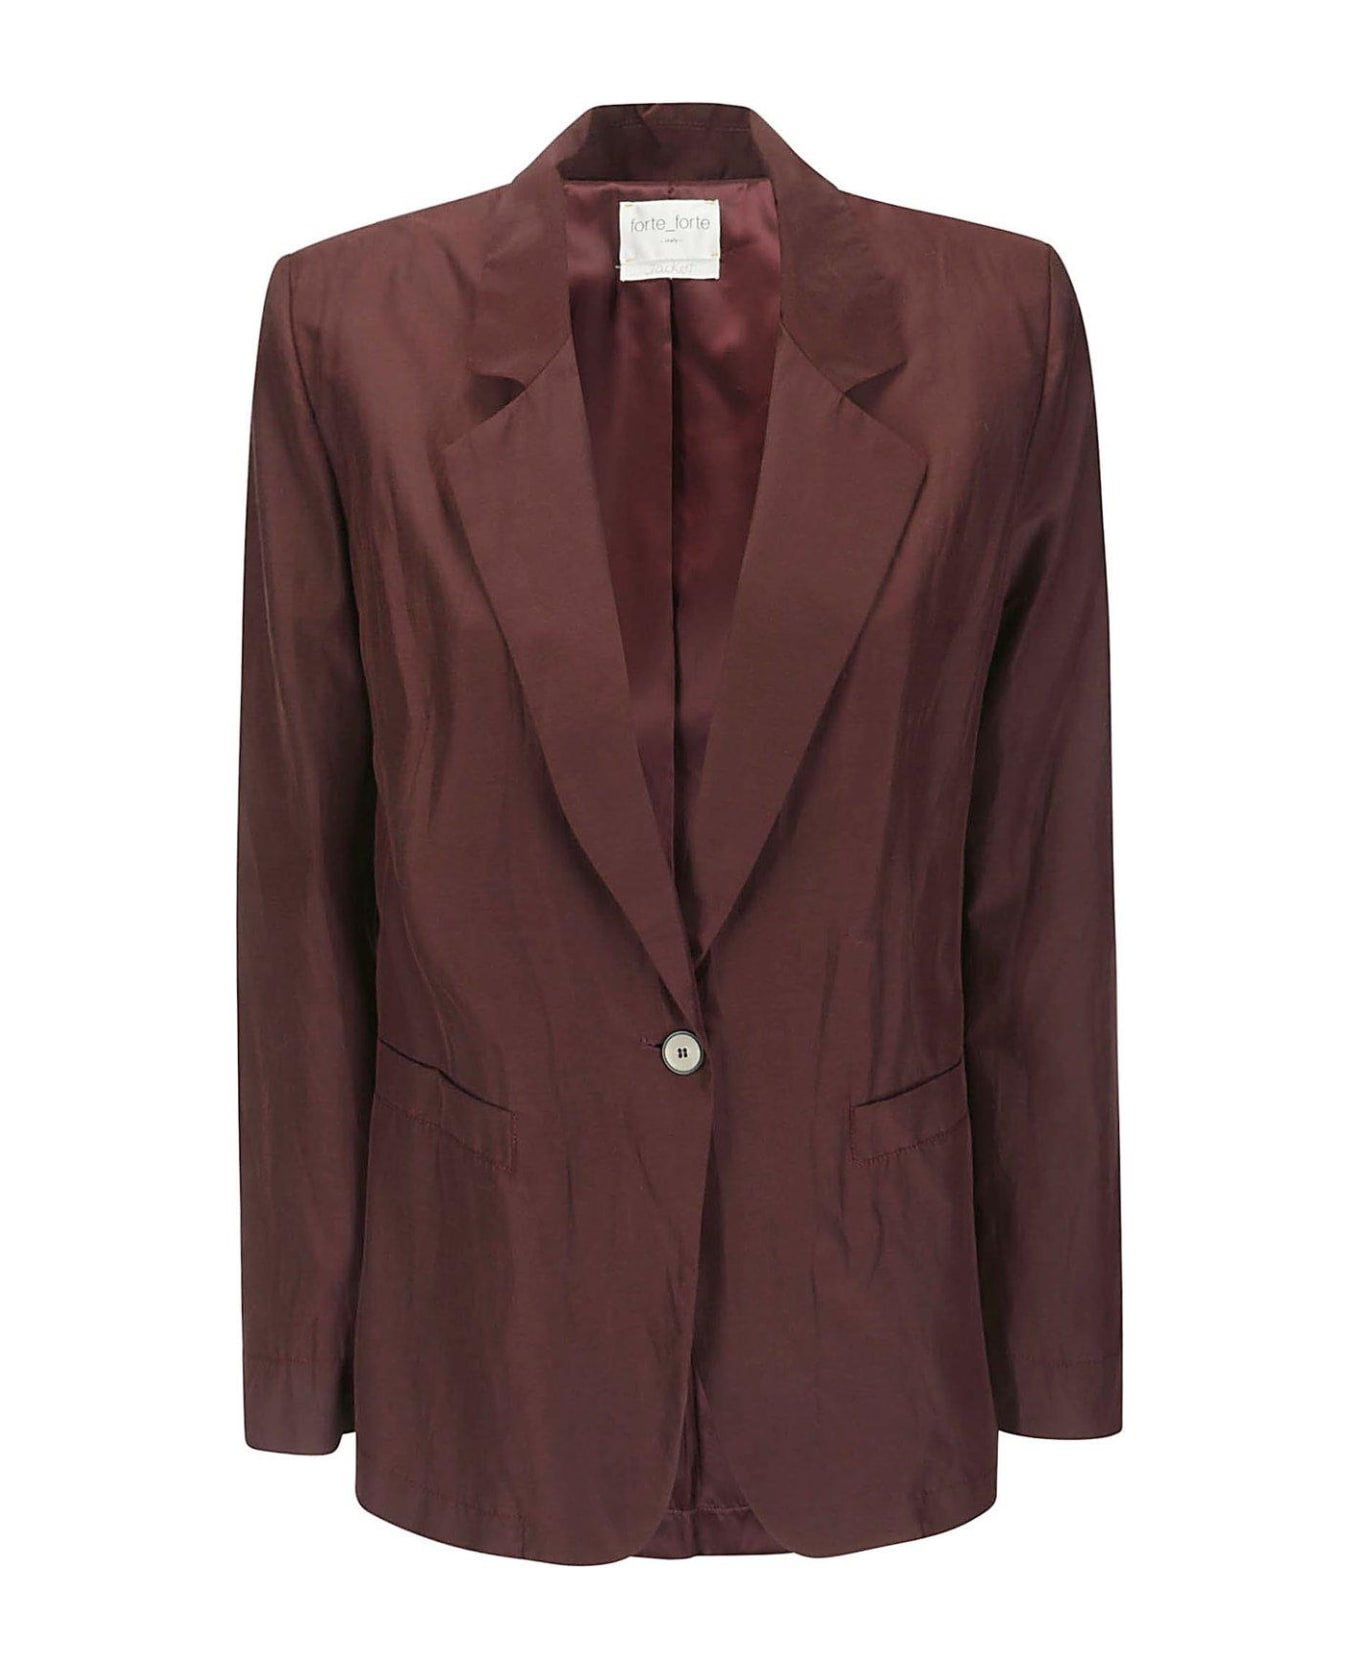 Forte_Forte Chic Boxy Jacket - Brown ブレザー